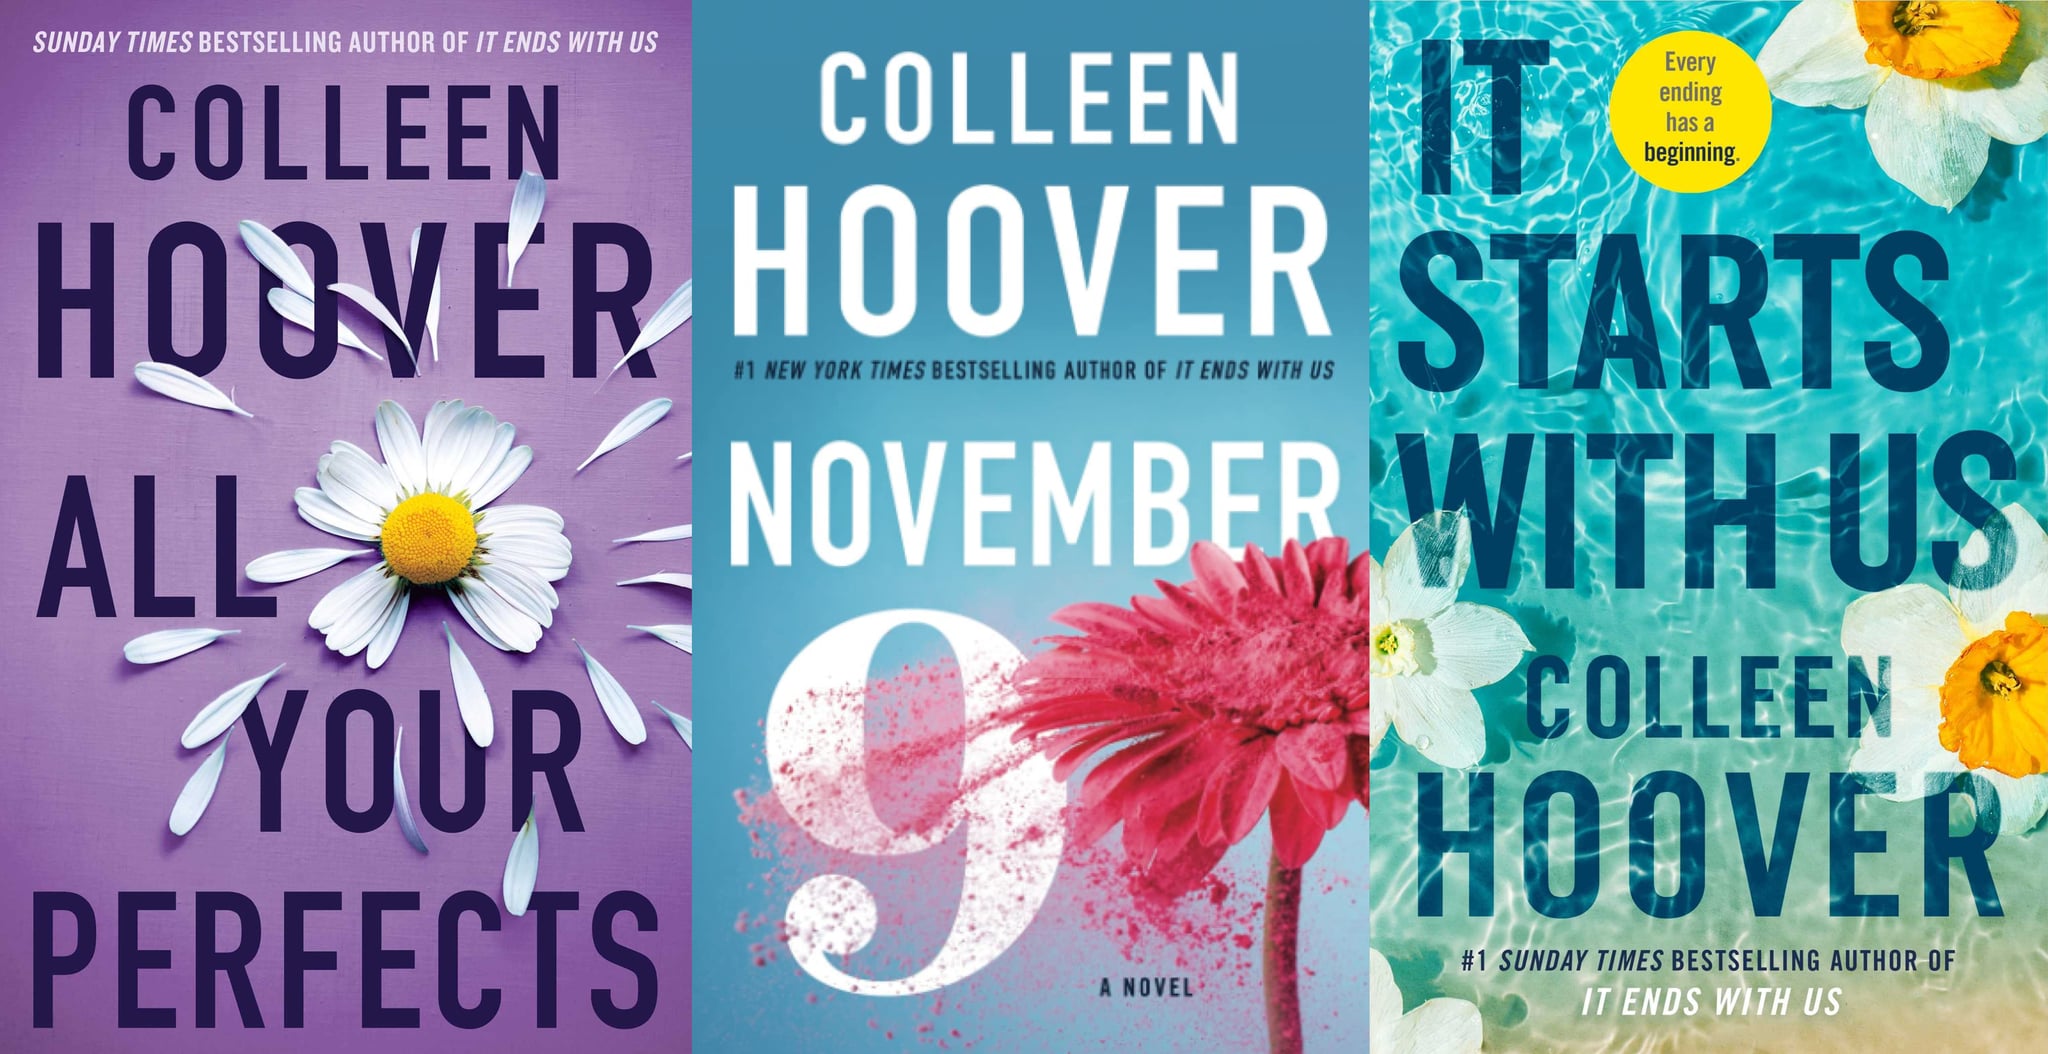 usa st. 4 Book Set Hopeless Series By Colleen Hoover english Paperback